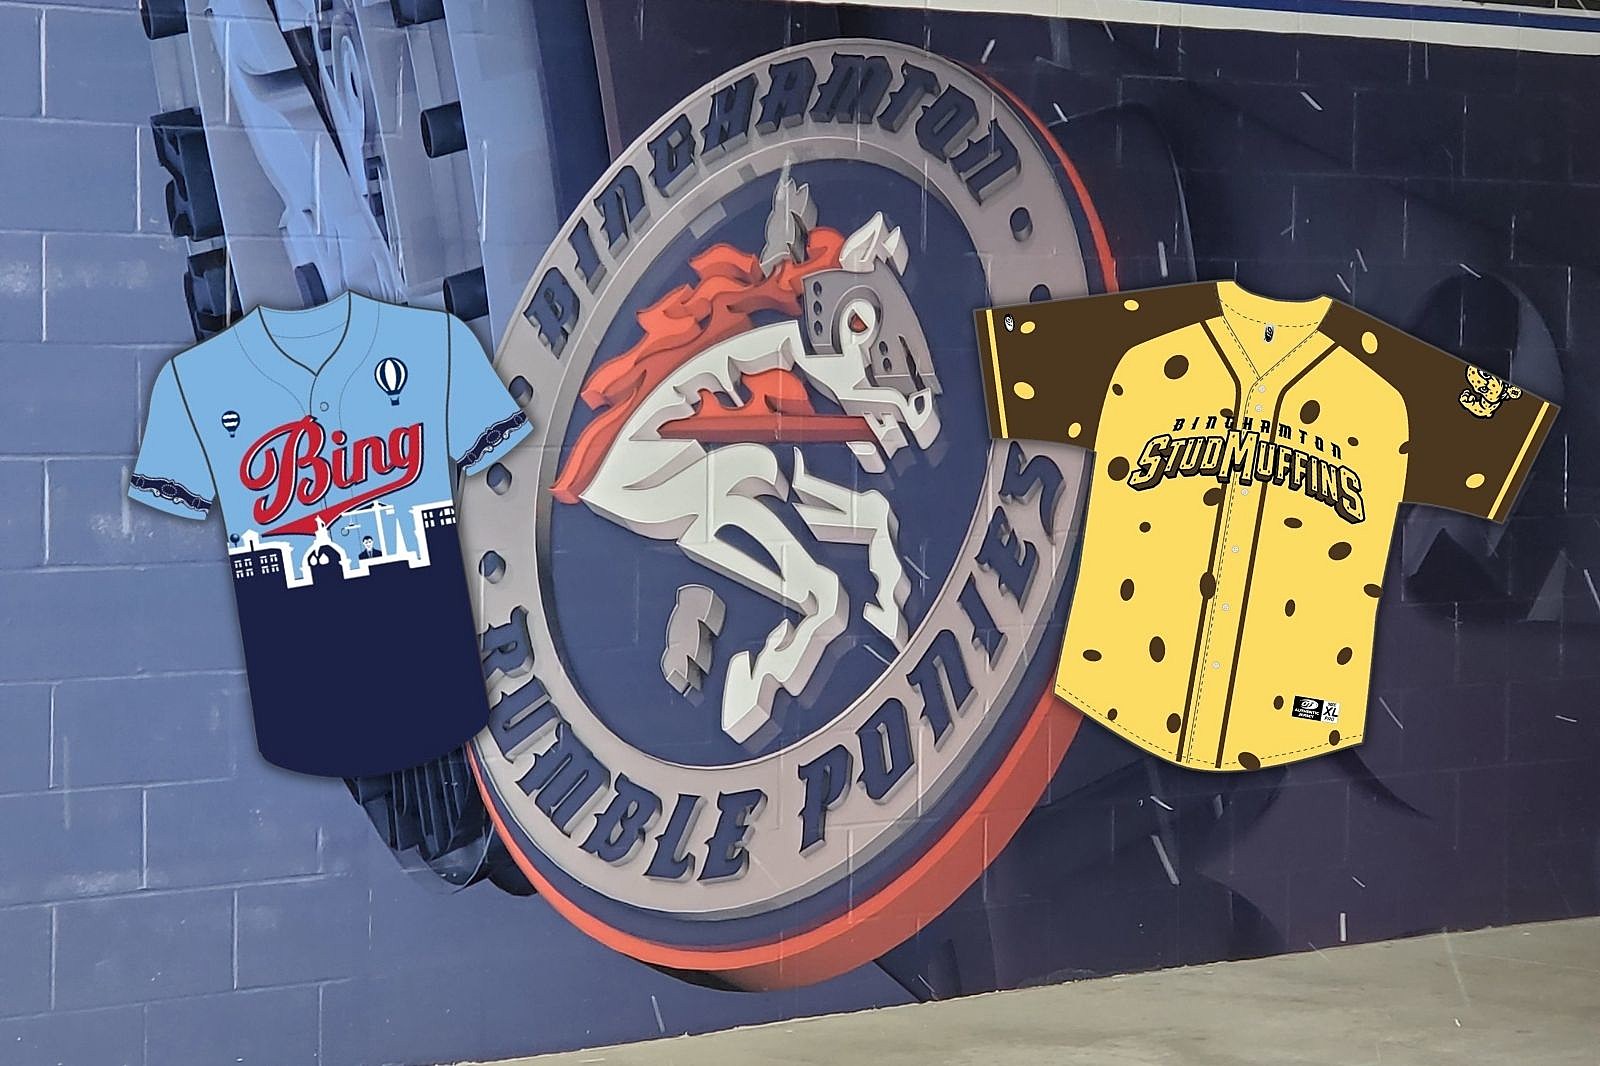 MLB Unveils 2022 All-Star Game Uniforms, And They're Phenomenal